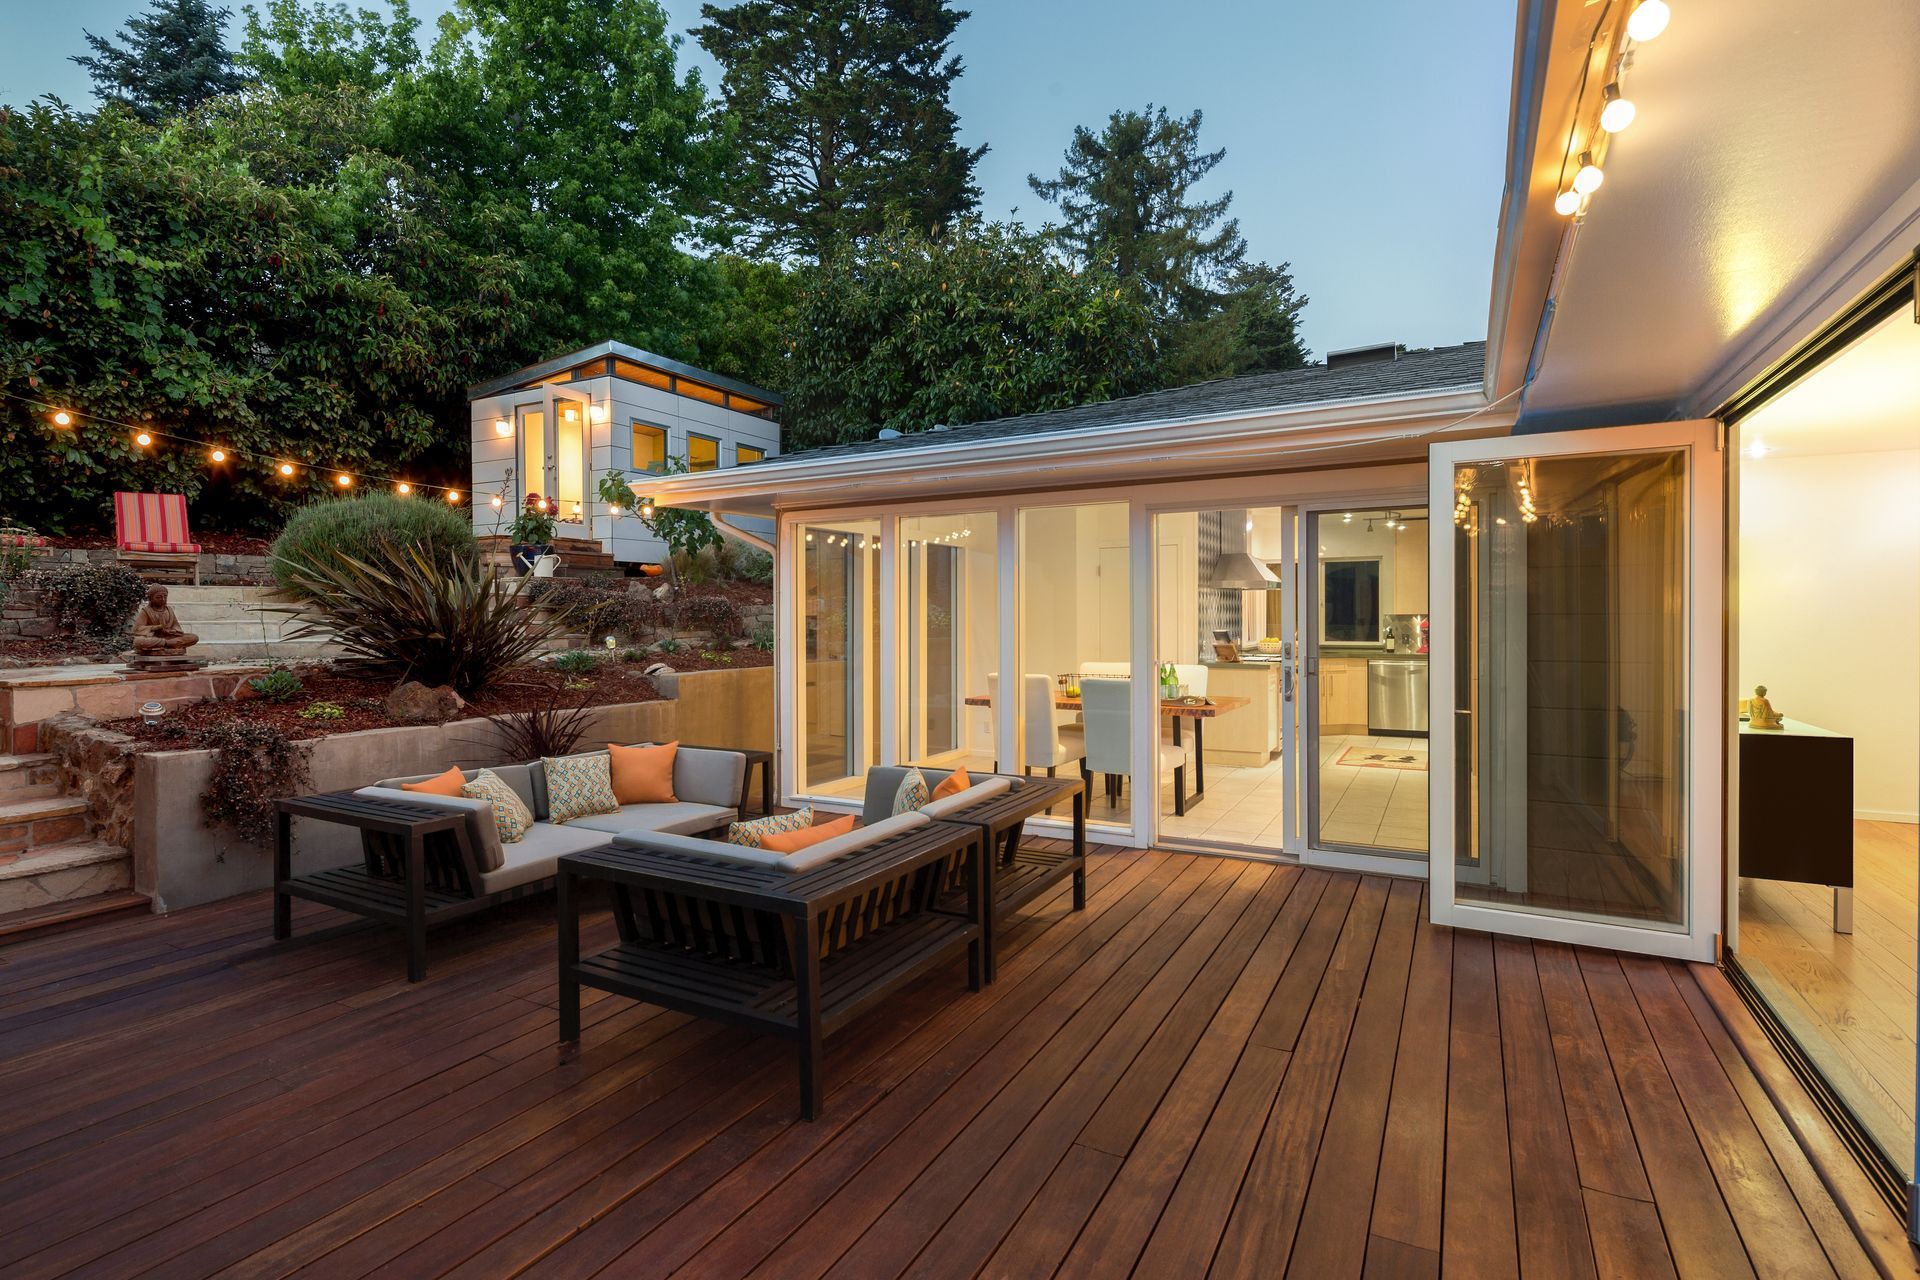 Scenic wooden deck bathed in the warm glow of twilight, with soft ambient lighting, creating a serene and inviting outdoor space.